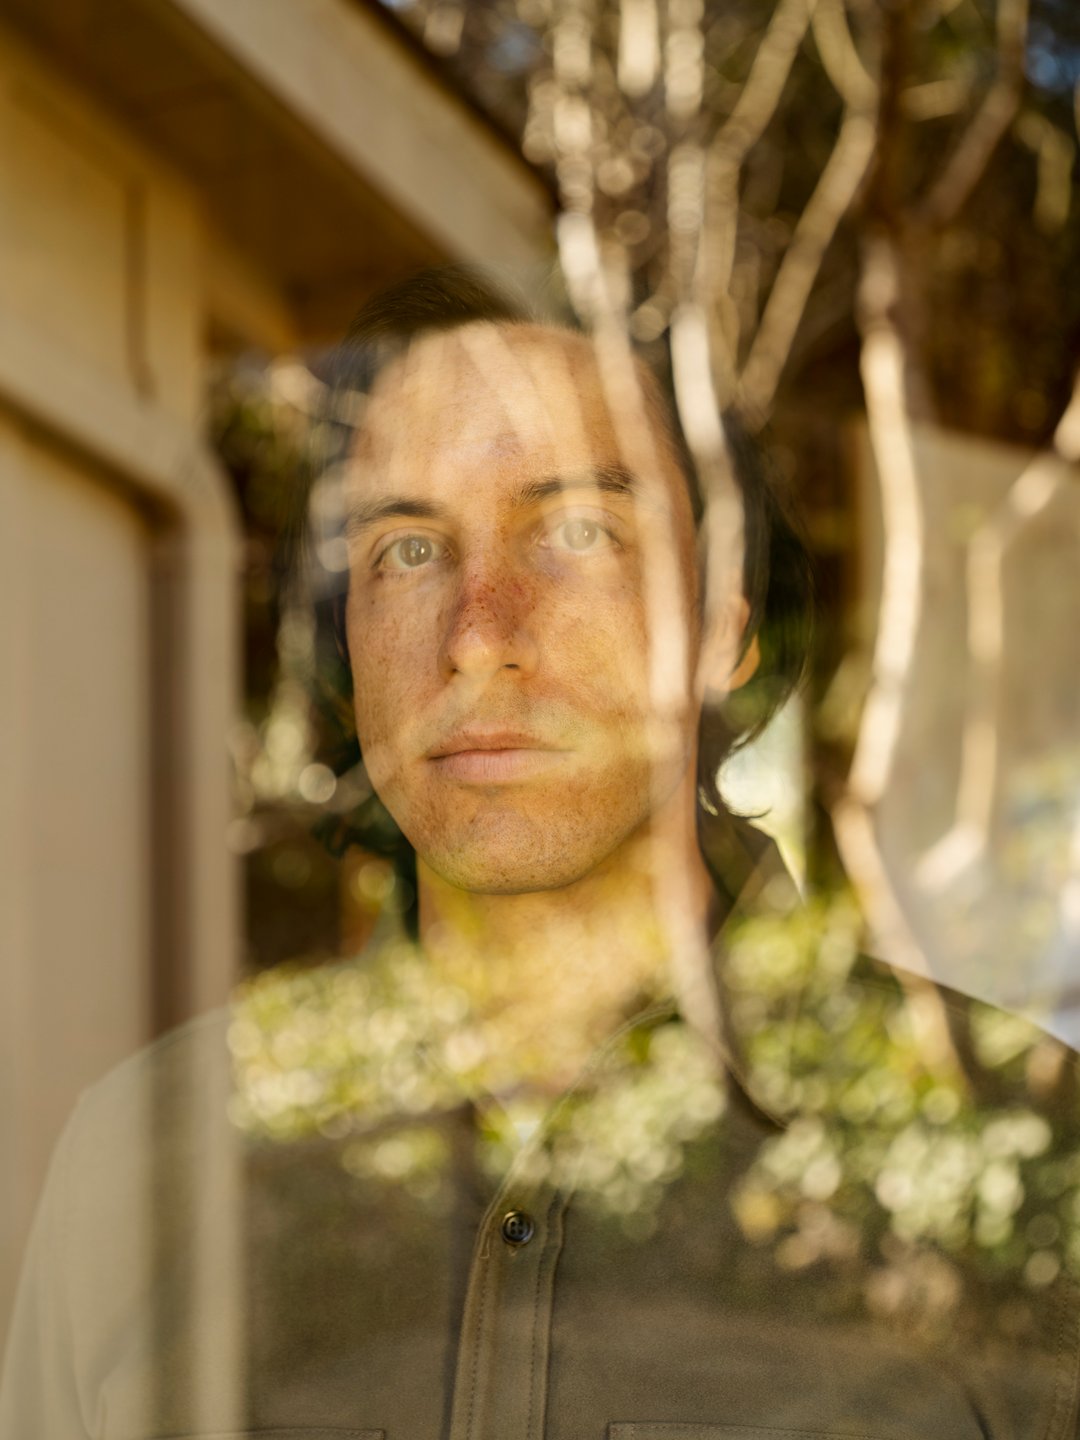 This photograph of Josh was taken from the other side of a window. We can see trees and leaves reflected in the window, which lends a kind of blurring effect to his face.